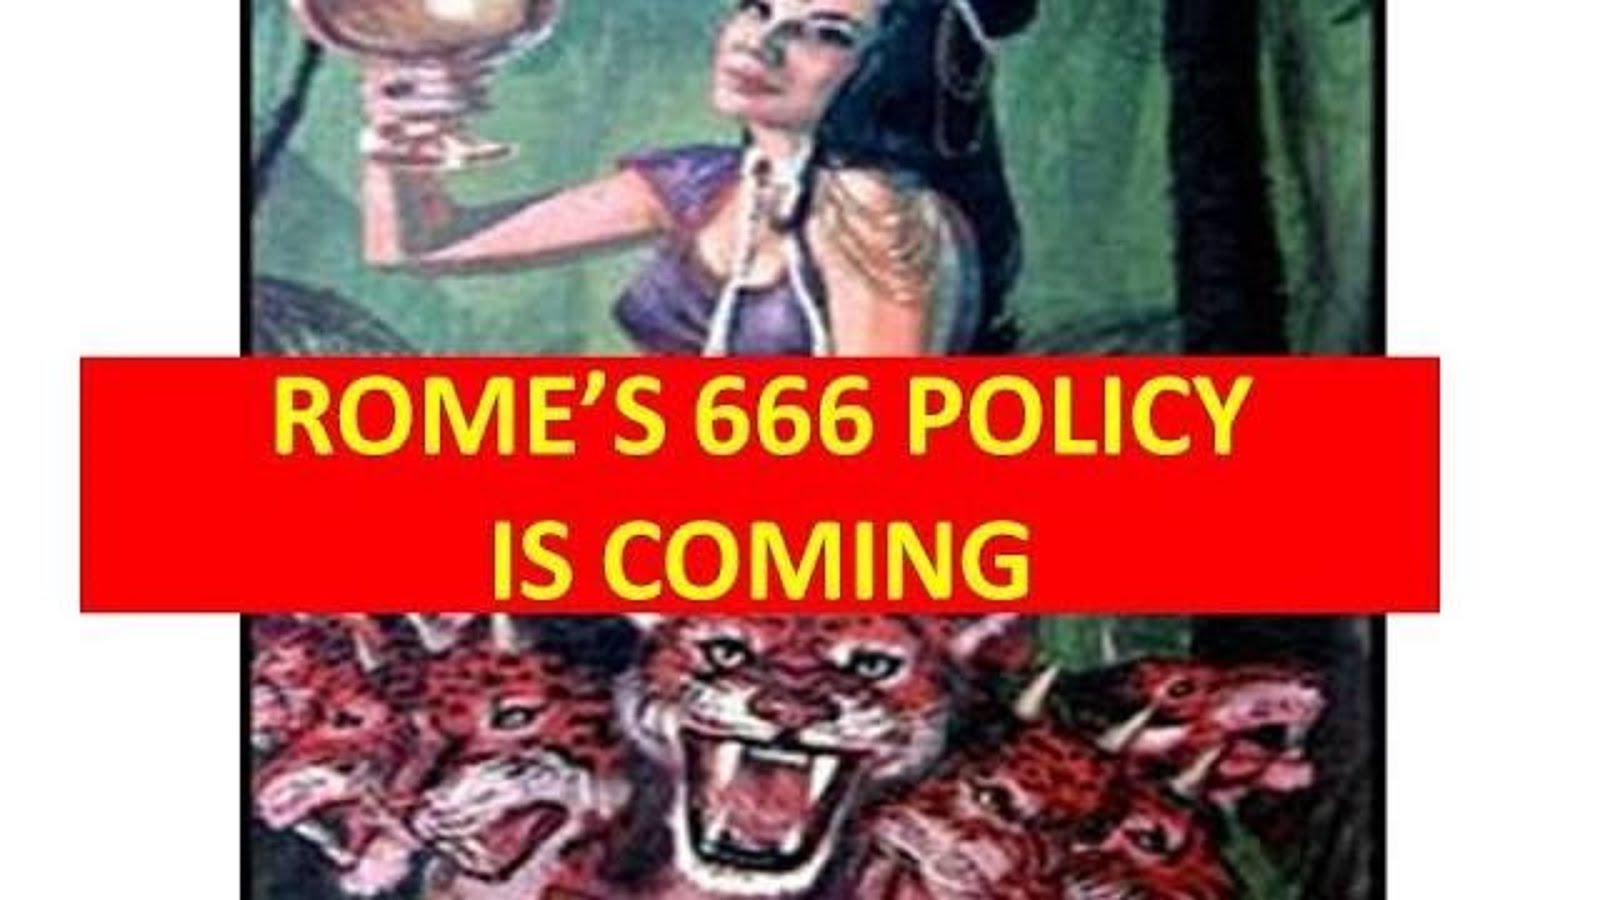 ROME'S 666 POLICY IS COMING